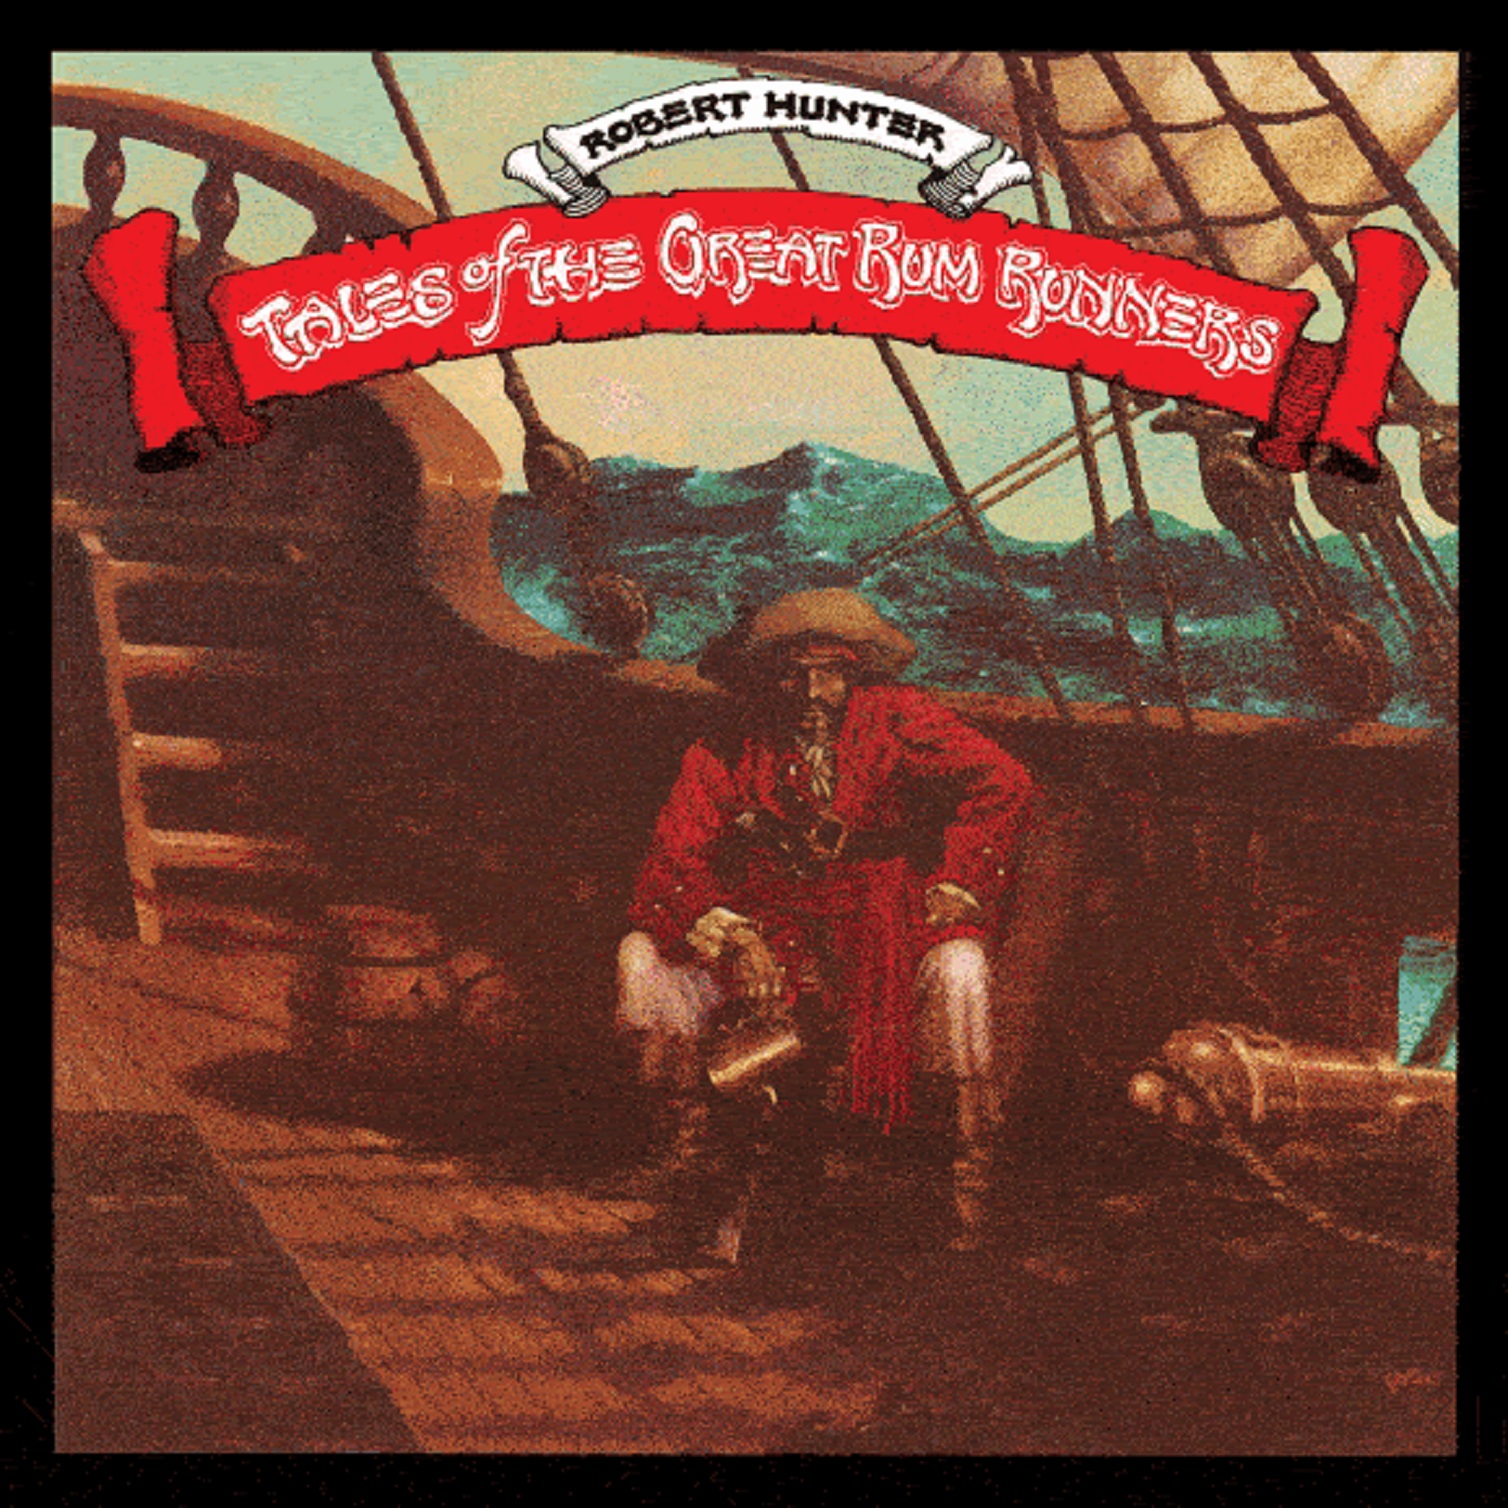 Now Shipping: Robert Hunter's TALES OF THE GREAT RUM RUNNERS (DELUXE EDITION)